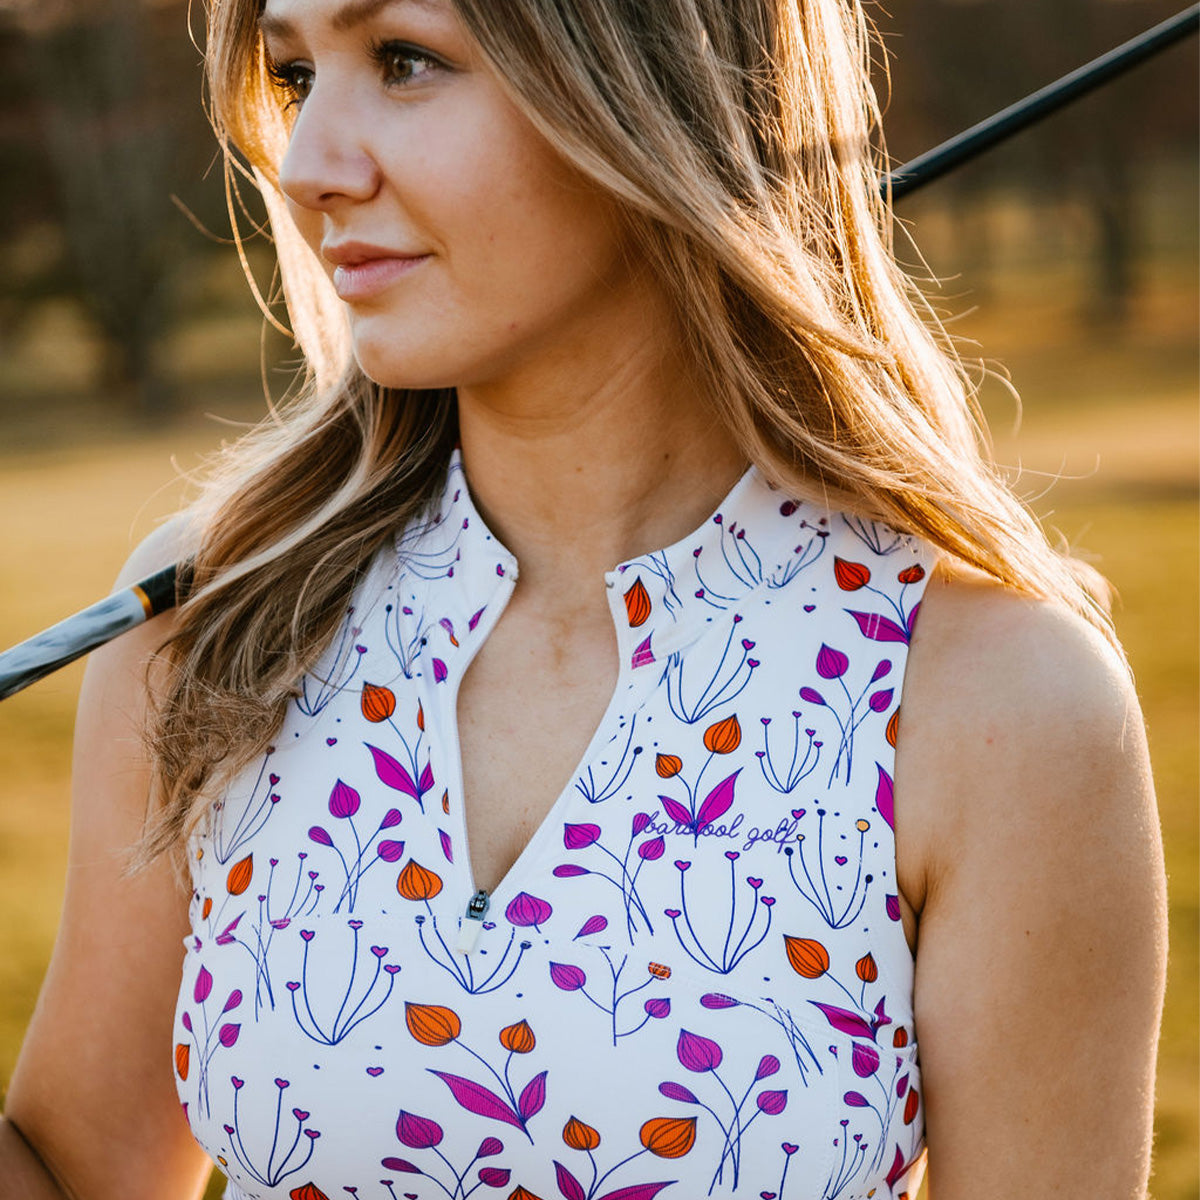 Barstool Golf Women's Floral Sleeveless Top II-T-Shirts-Fore Play-White-XS-Barstool Sports